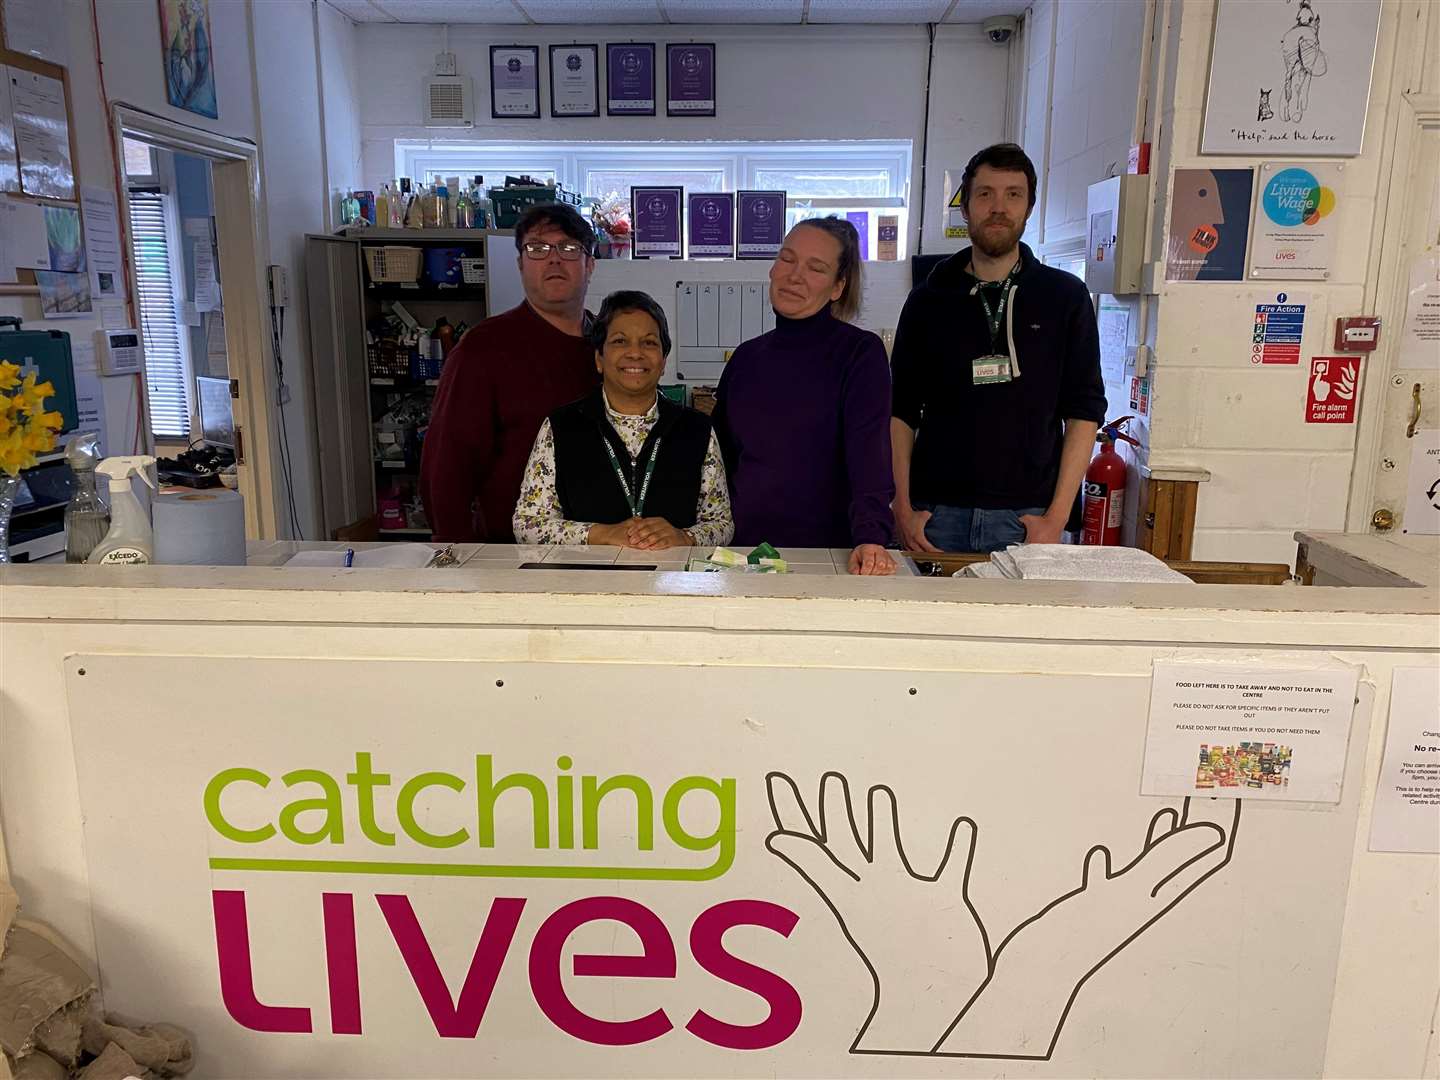 Some of the Catching Lives team in Canterbury